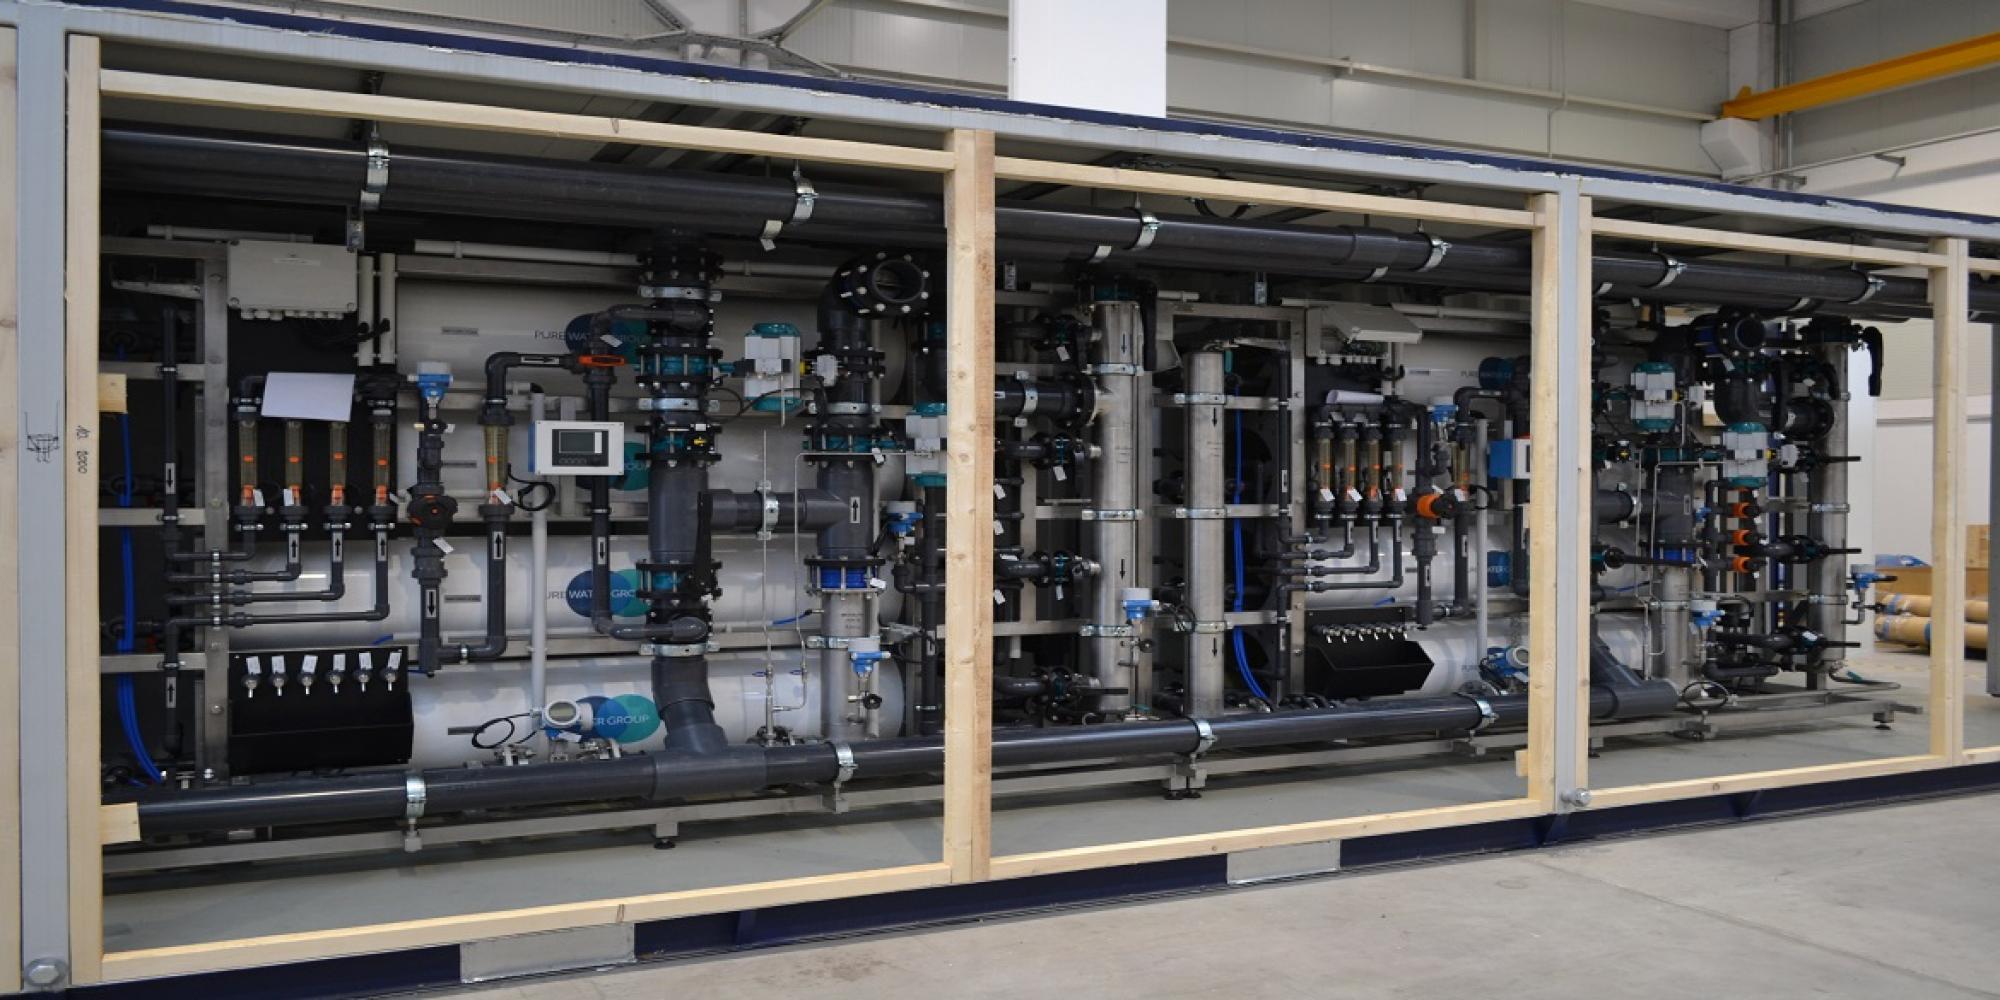 High capacity desalination system installed in containers in Hungary